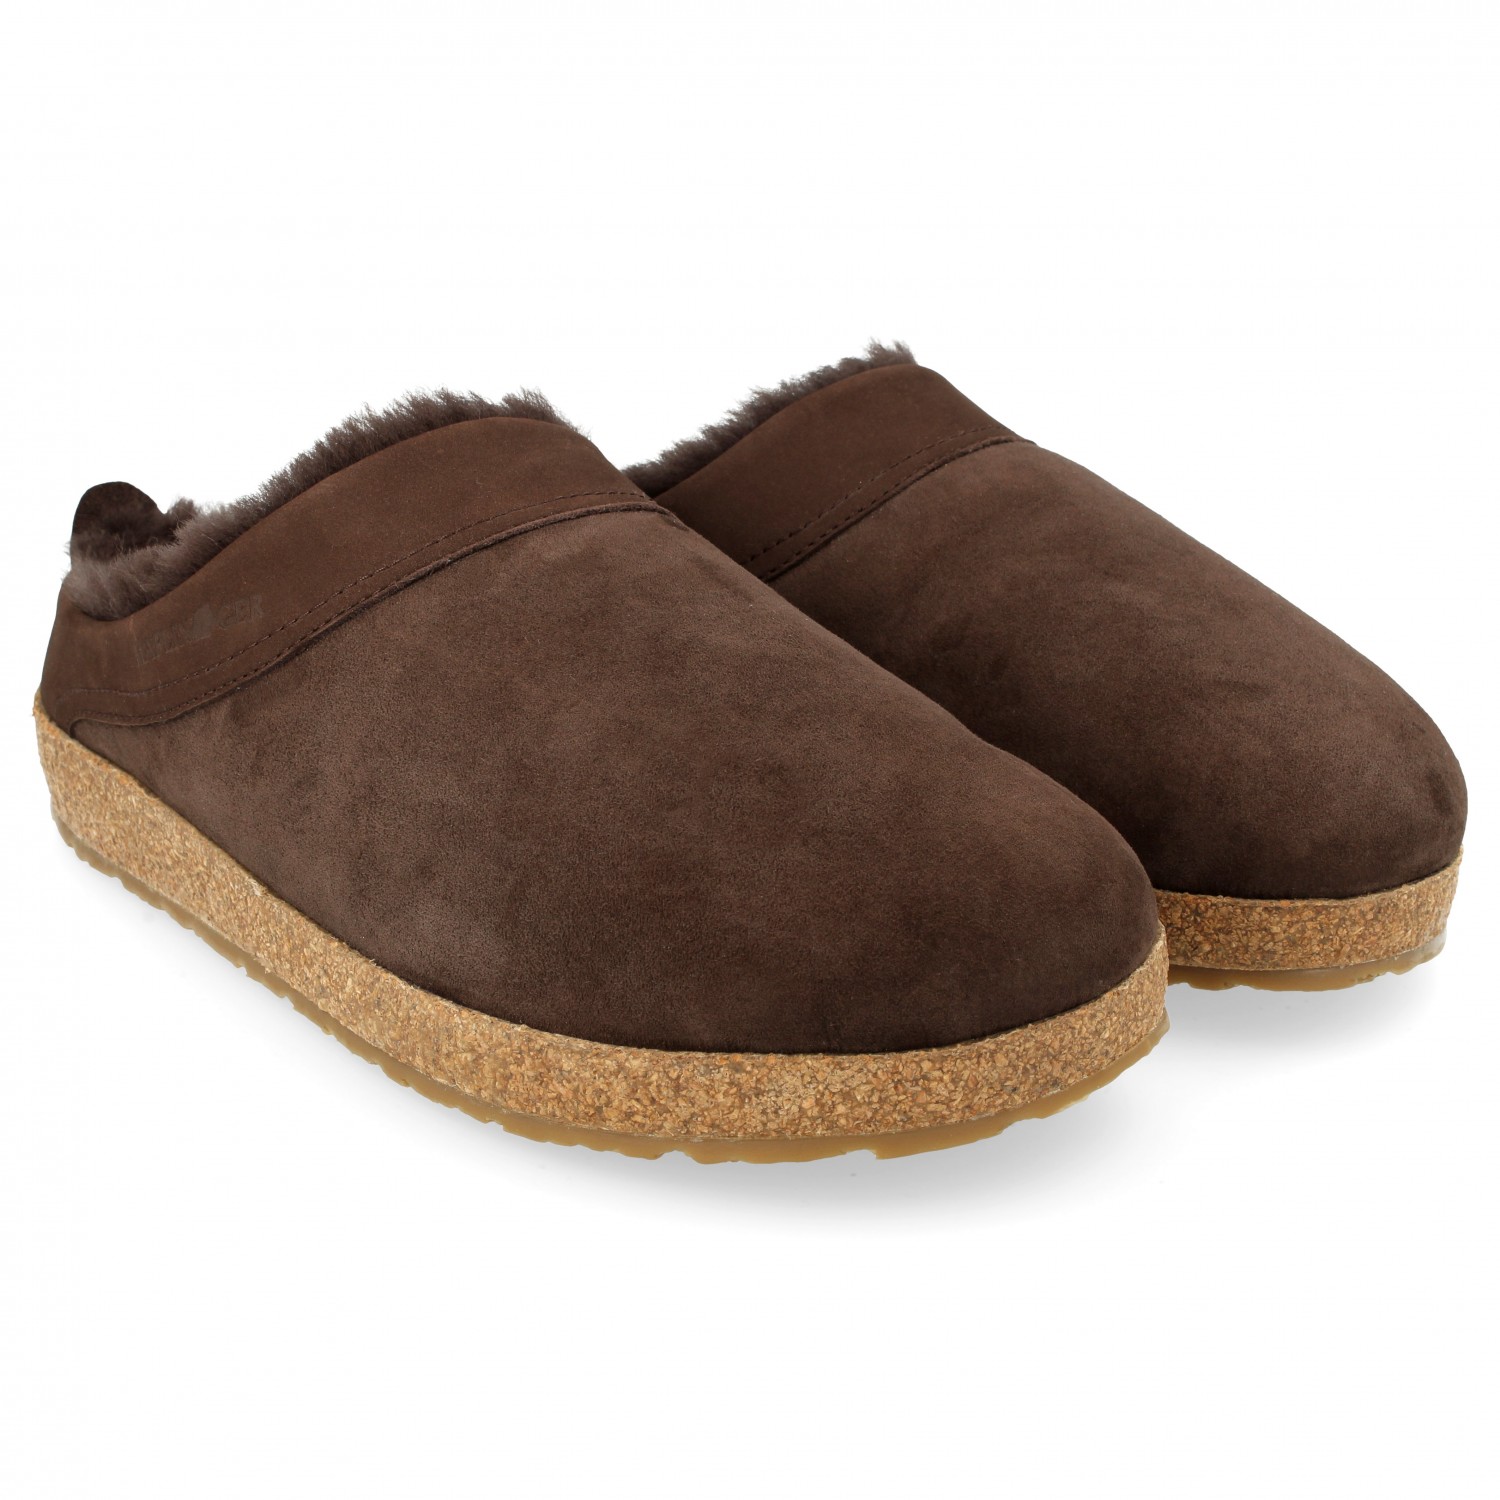 Sheepskin Clogs by Haflinger | Adult Clogs in Sheepskin with Cork/Latex ...